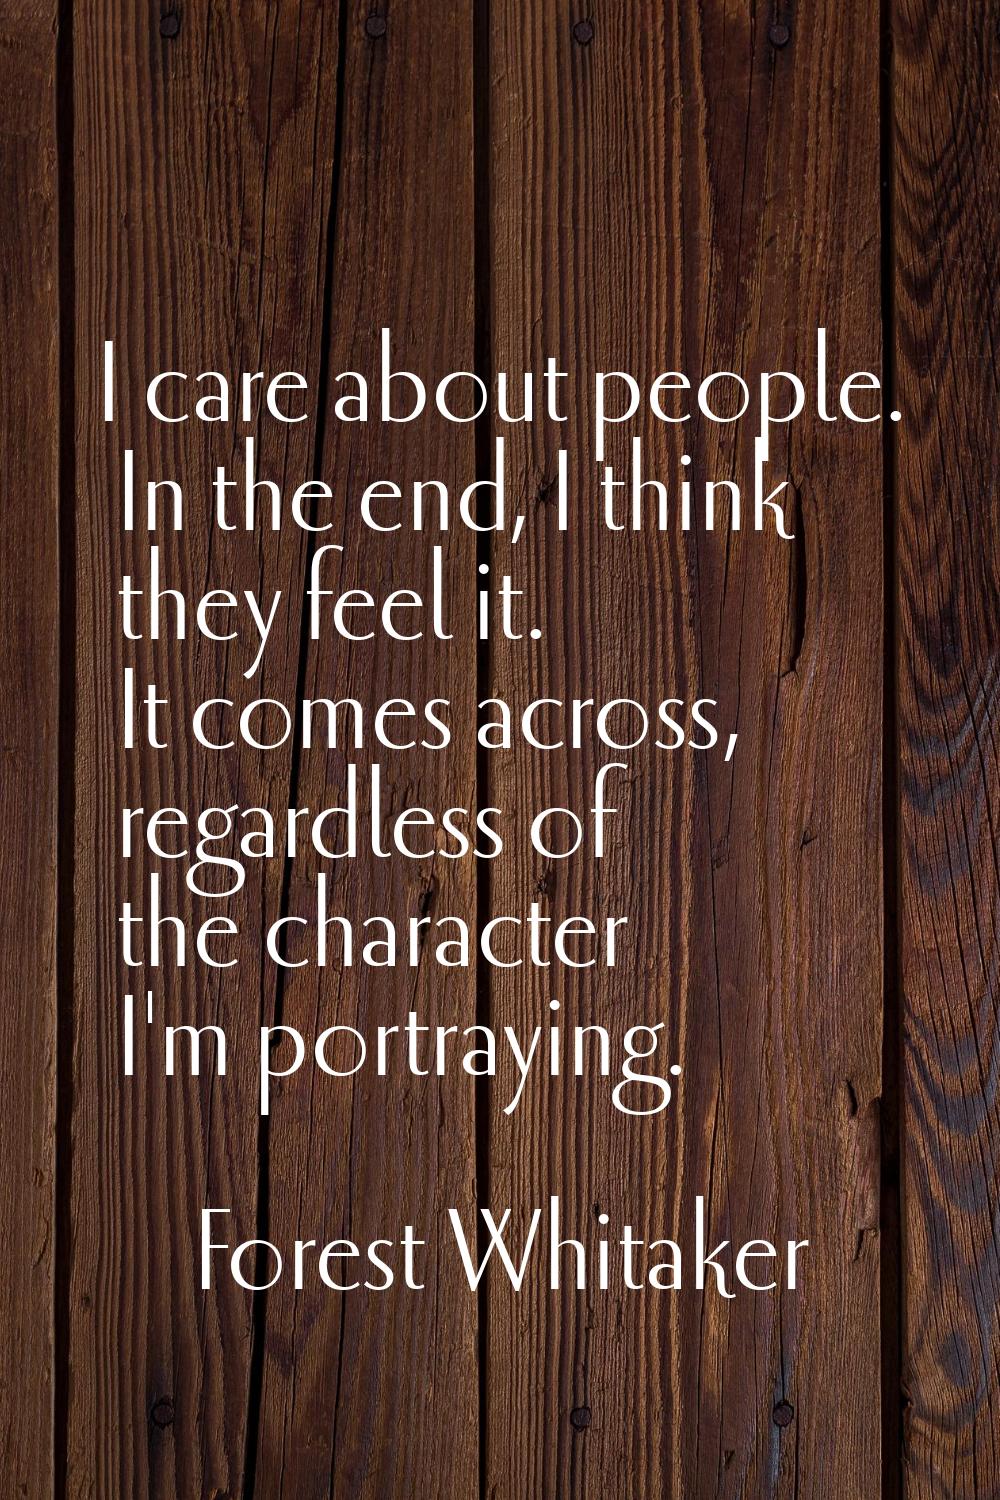 I care about people. In the end, I think they feel it. It comes across, regardless of the character